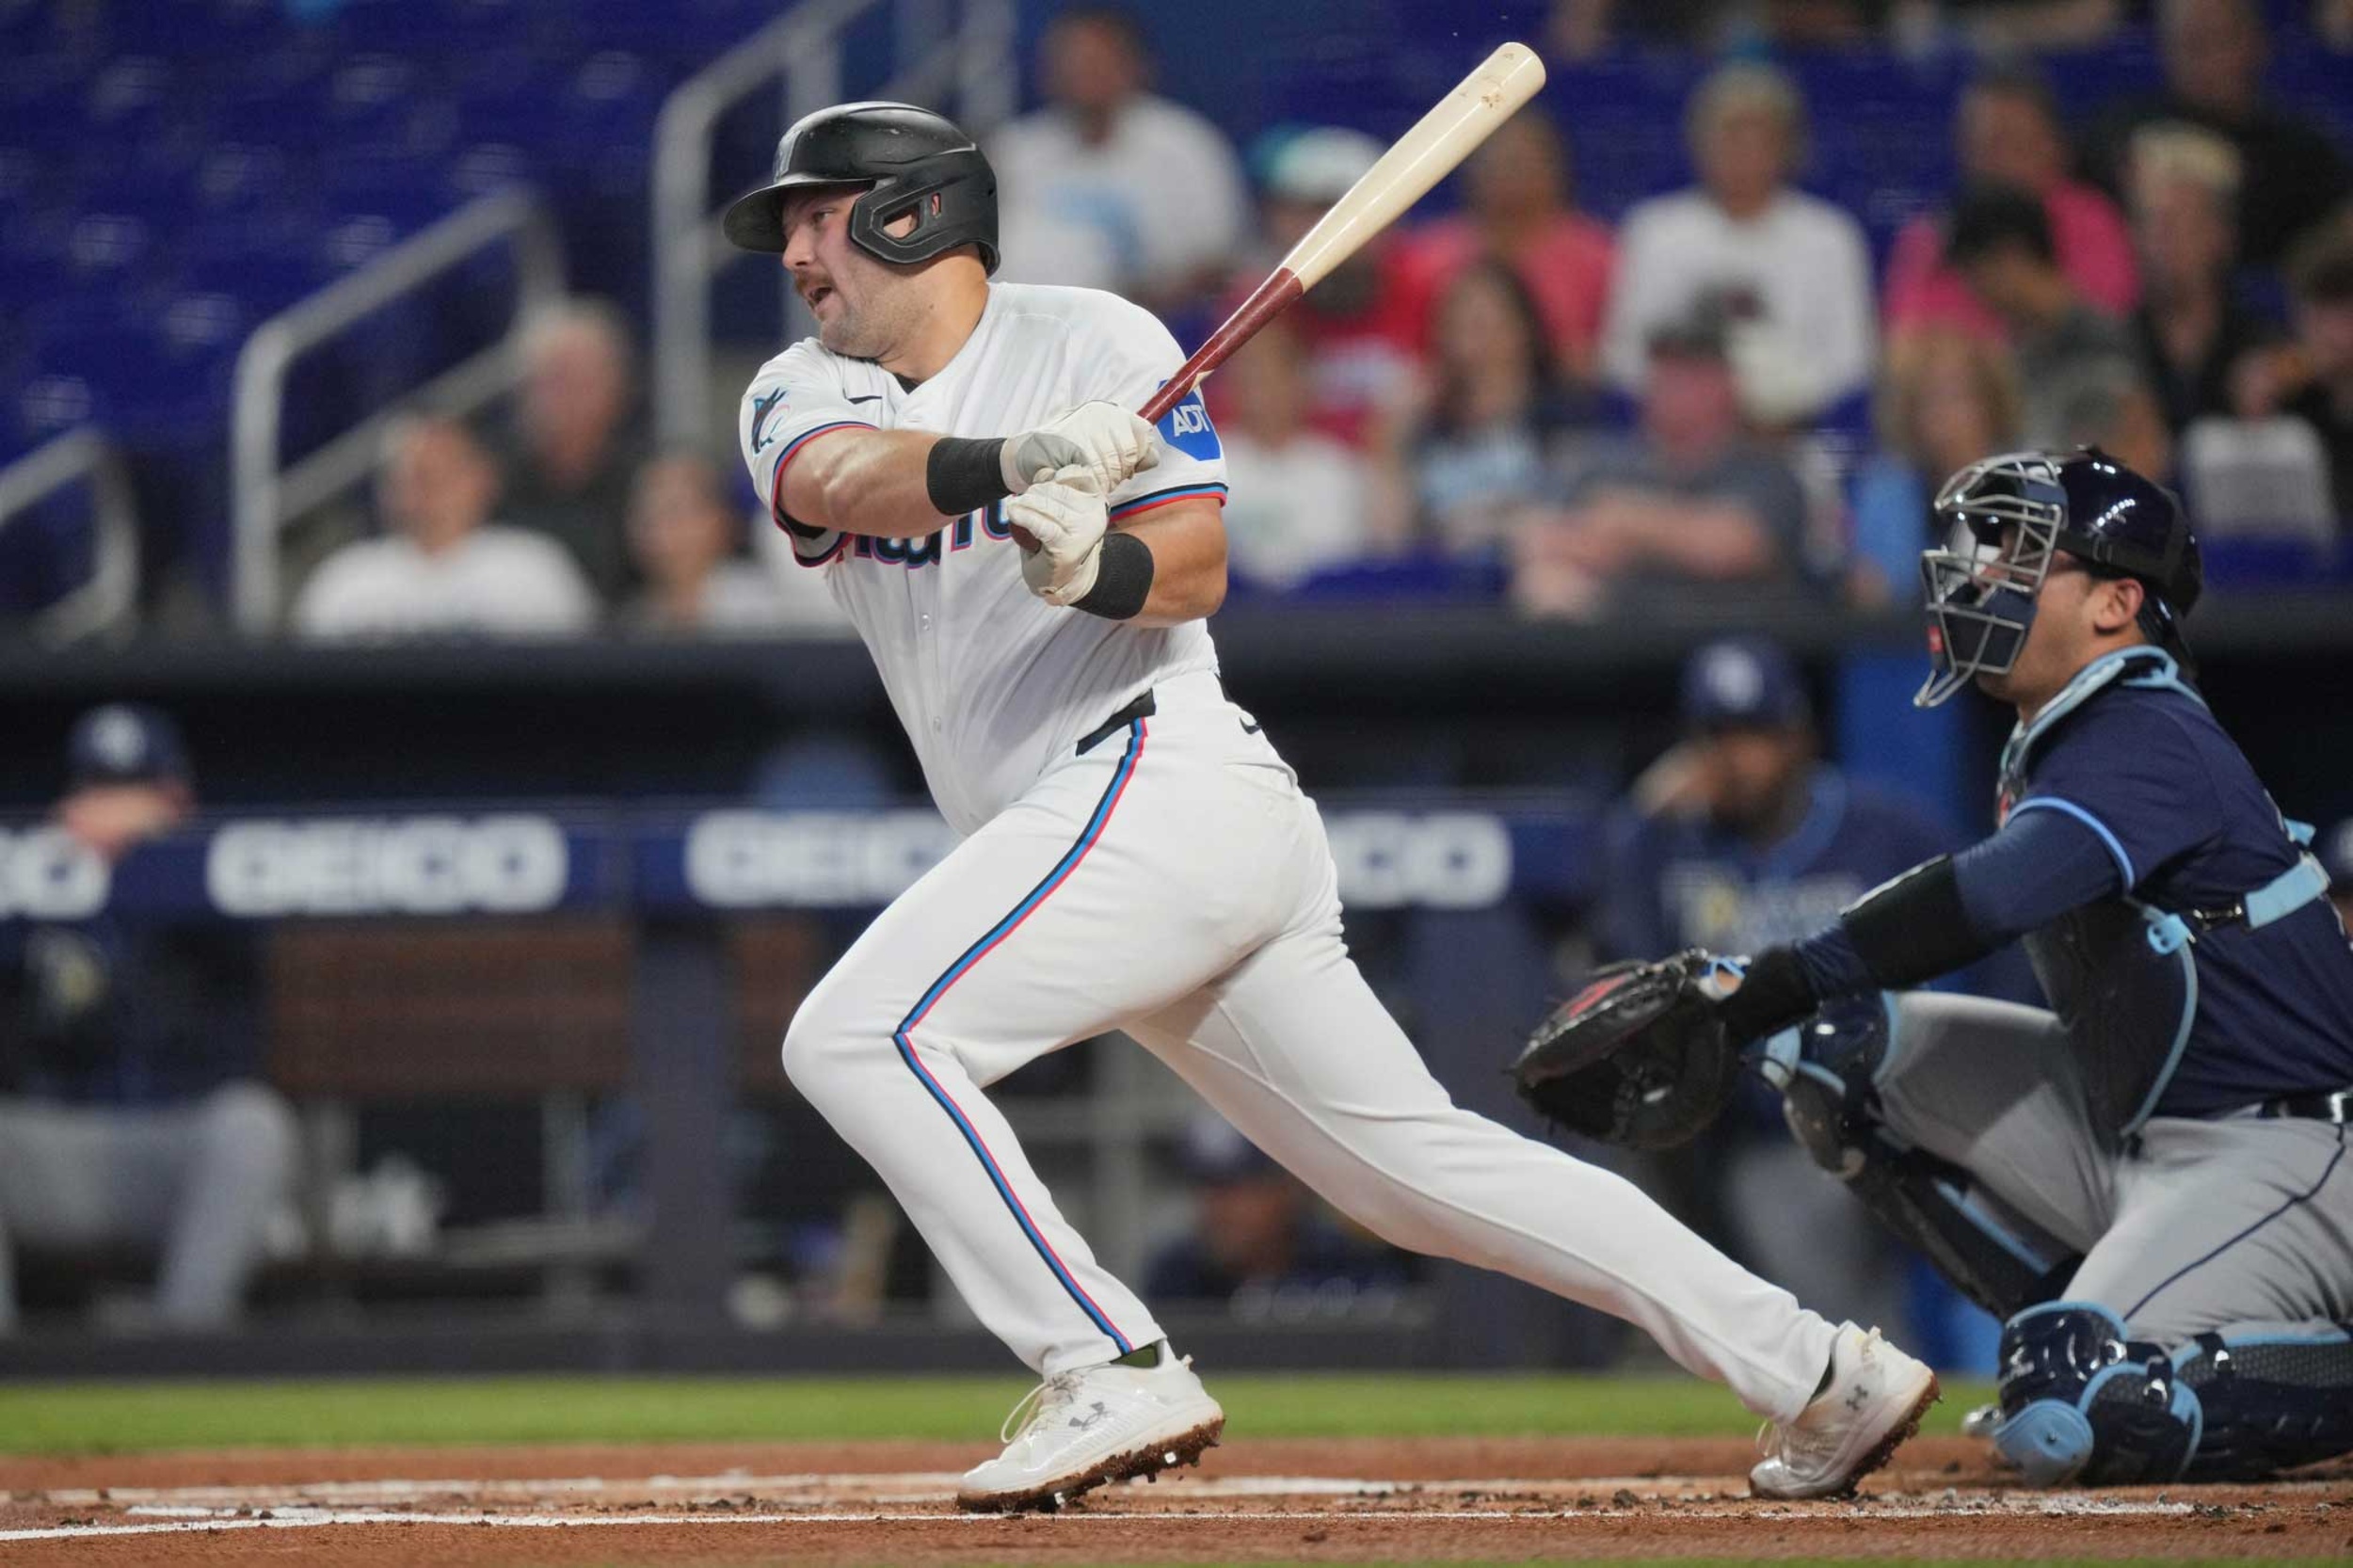 <p>Burger's power arrived in a big way last season with 34 home runs between the White Sox and Marlins. Miami is wondering where his bat went this year with only four home runs in 42 games, also missing time to injury.</p><p><a href='https://www.msn.com/en-us/community/channel/vid-cj9pqbr0vn9in2b6ddcd8sfgpfq6x6utp44fssrv6mc2gtybw0us'>Follow us on MSN to see more of our exclusive MLB content.</a></p>